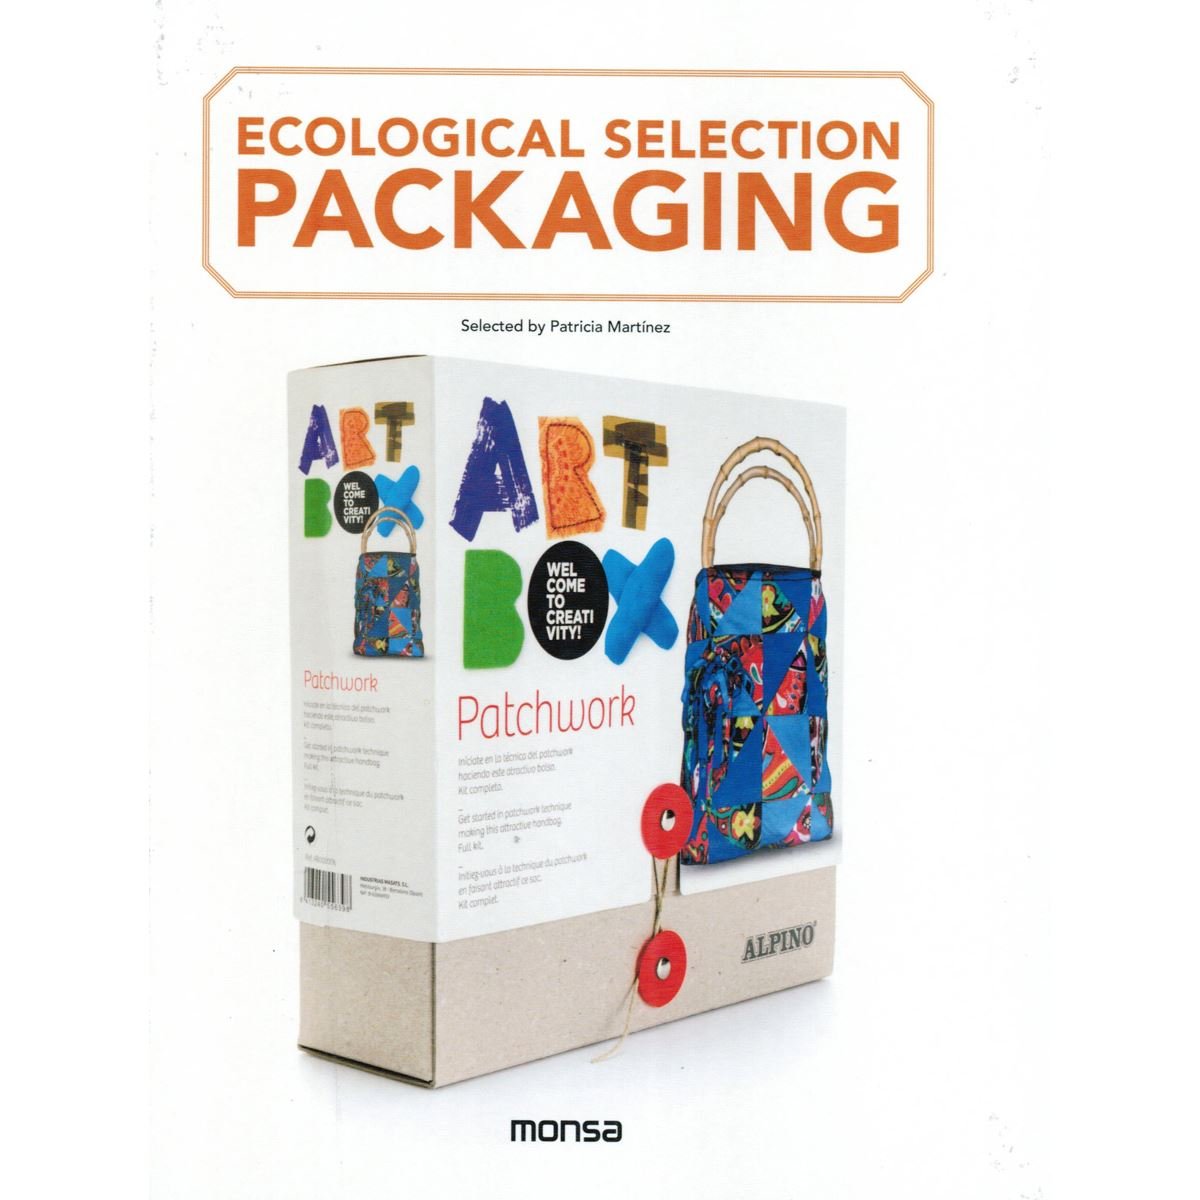 Ecological Selection Packaging